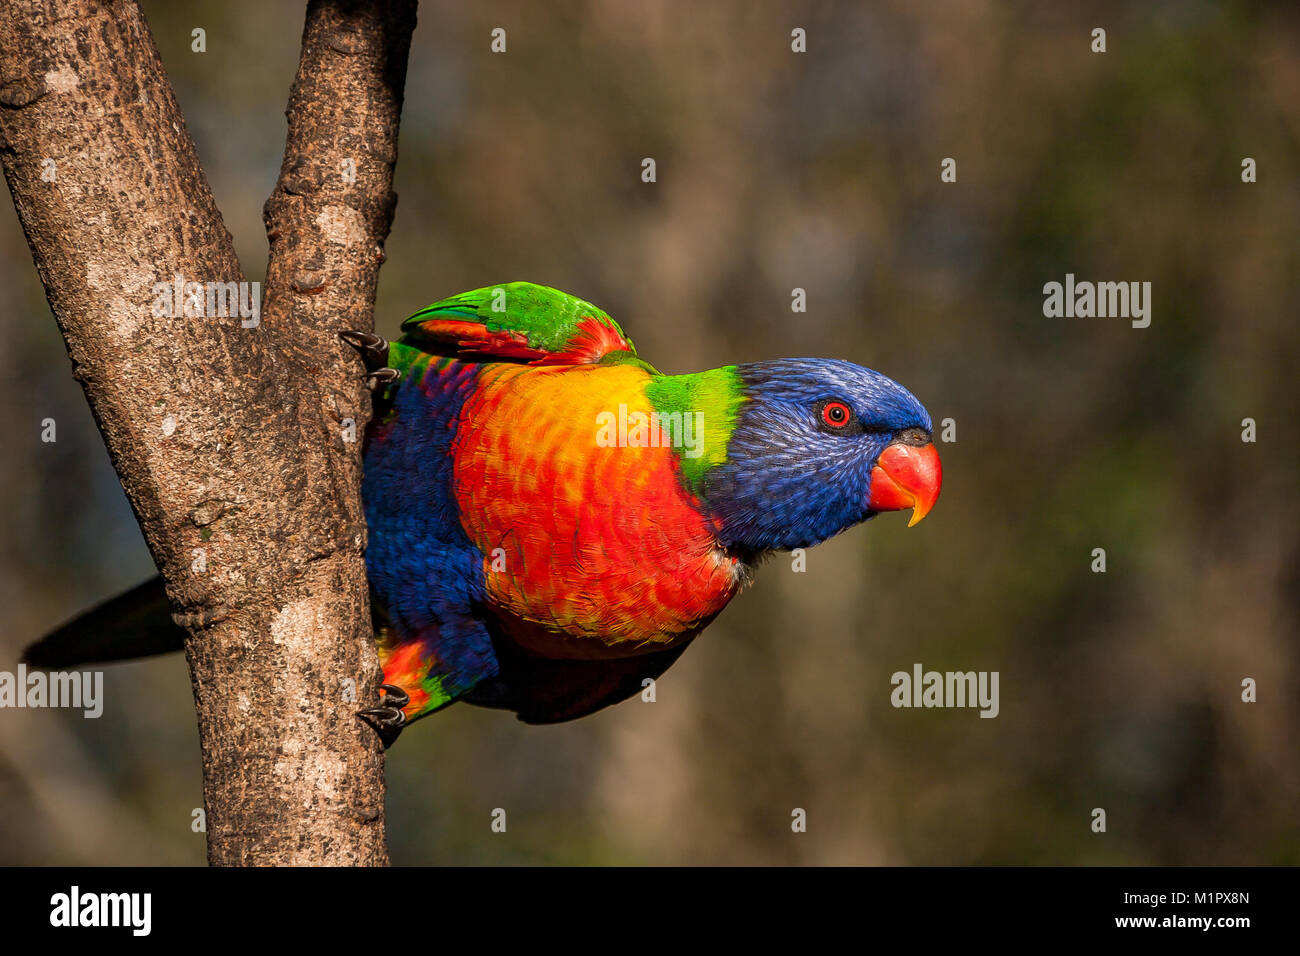 Rainbow lorikeet on side of a tree with tail visible in the background. 3/4 profile of a rainbow lorikeet ready to take flight Stock Photo